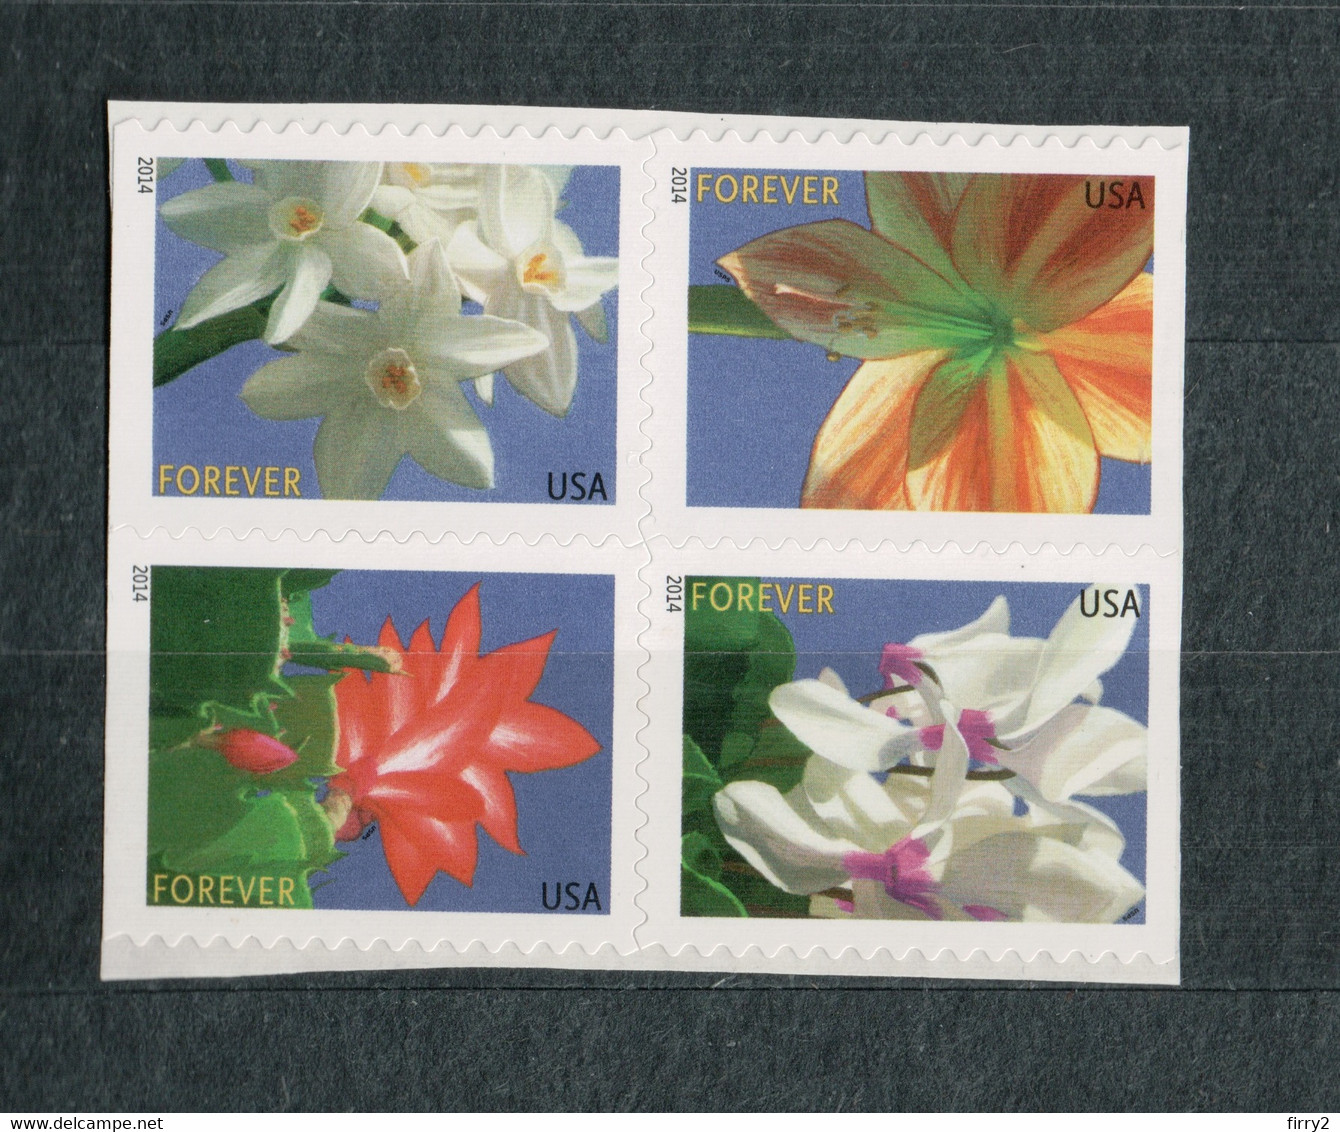 USA Scott #  4862 - 4865   2014  49 C  Winter Flowers  (4865a)              Mint NH  (MNH) - Unused Stamps